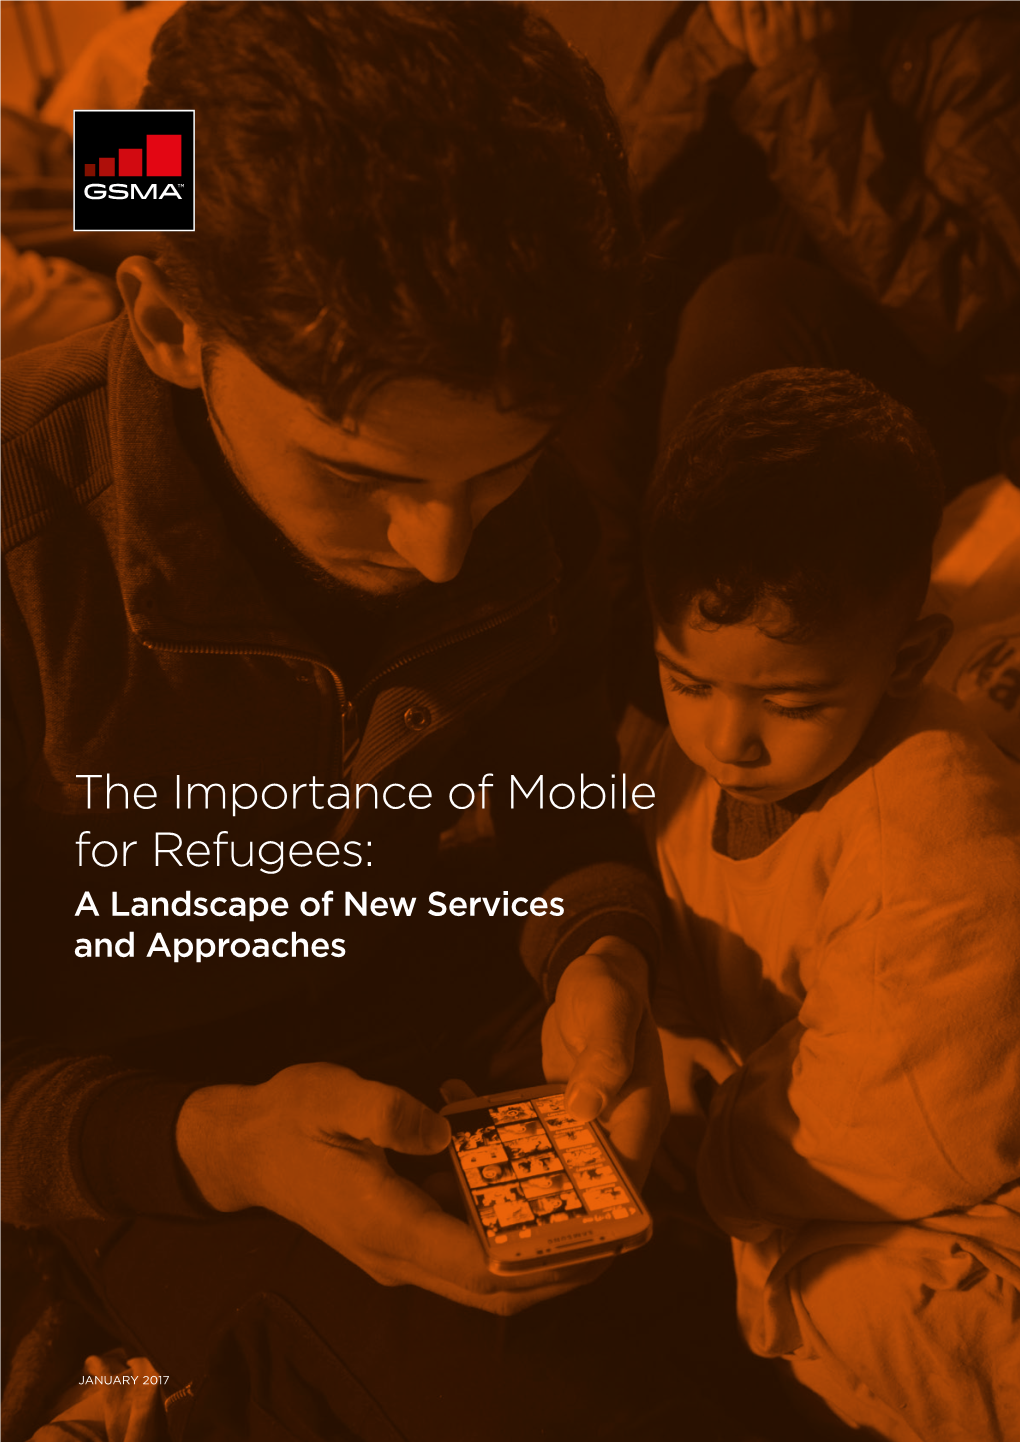 The Importance of Mobile for Refugees: a Landscape of New Services and Approaches